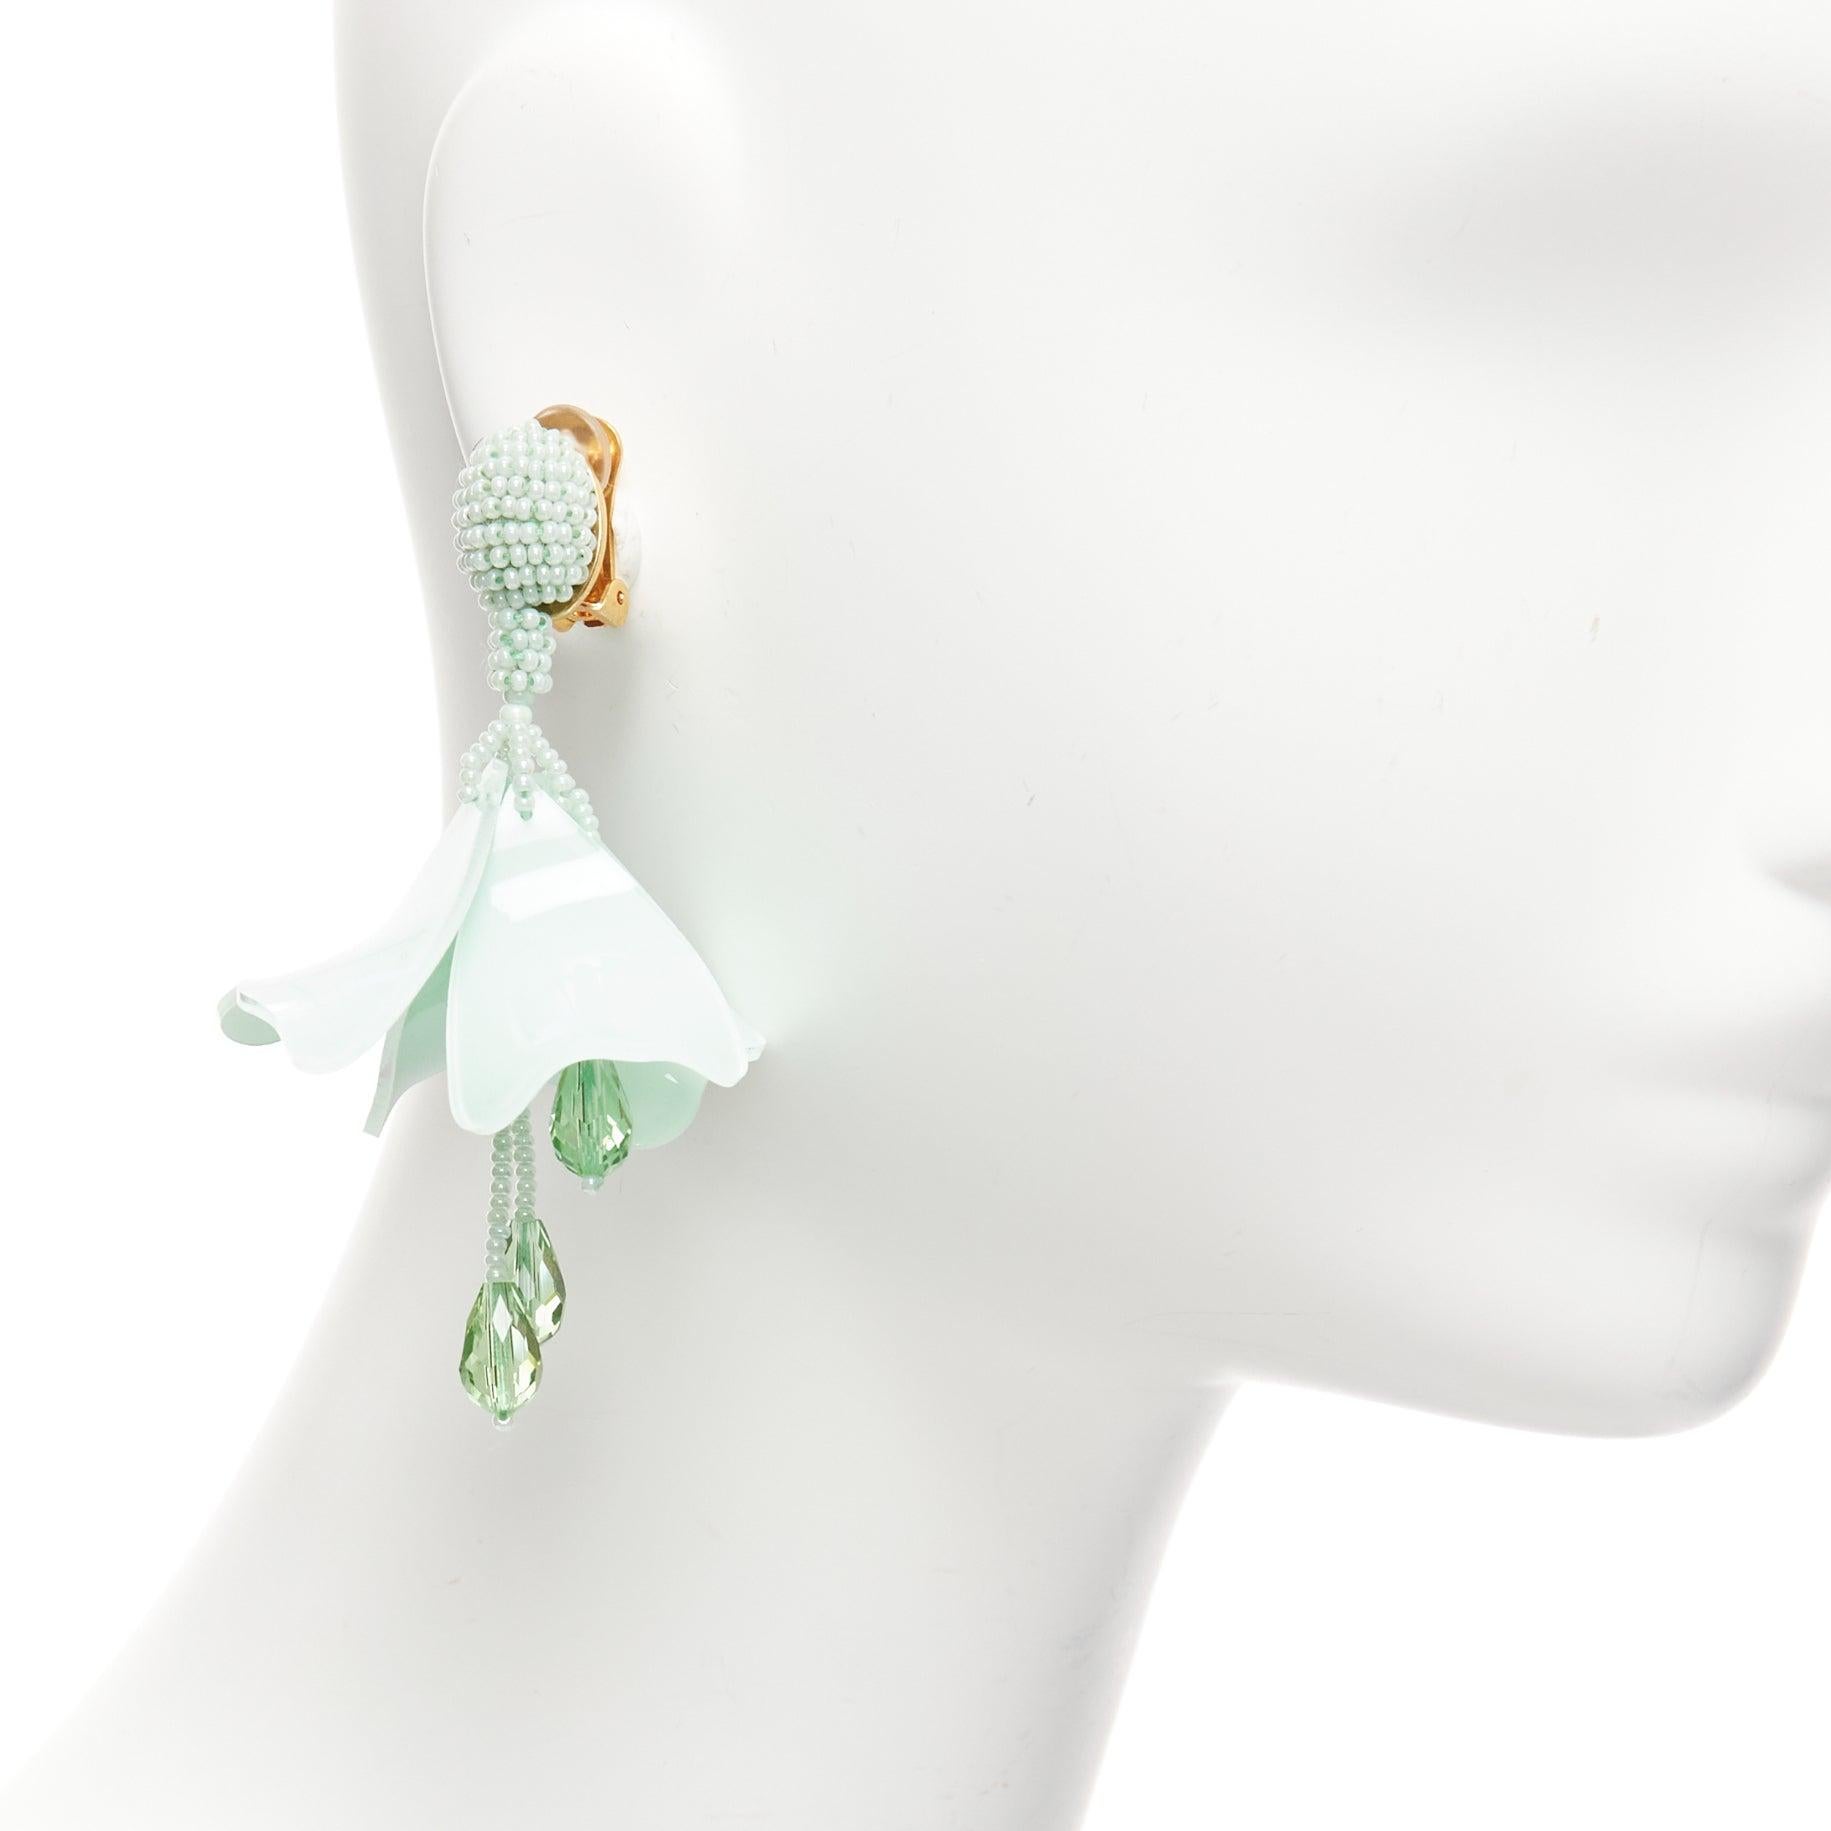 OSCAR DE LA RENTA mint green beaded acrylic flower dangling clip on earrings pair
Reference: AAWC/A01050
Brand: Oscar de la Renta
Material: Acrylic, Metal
Color: Green, Gold
Pattern: Solid
Closure: Clip On
Lining: Gold Metal
Made in: